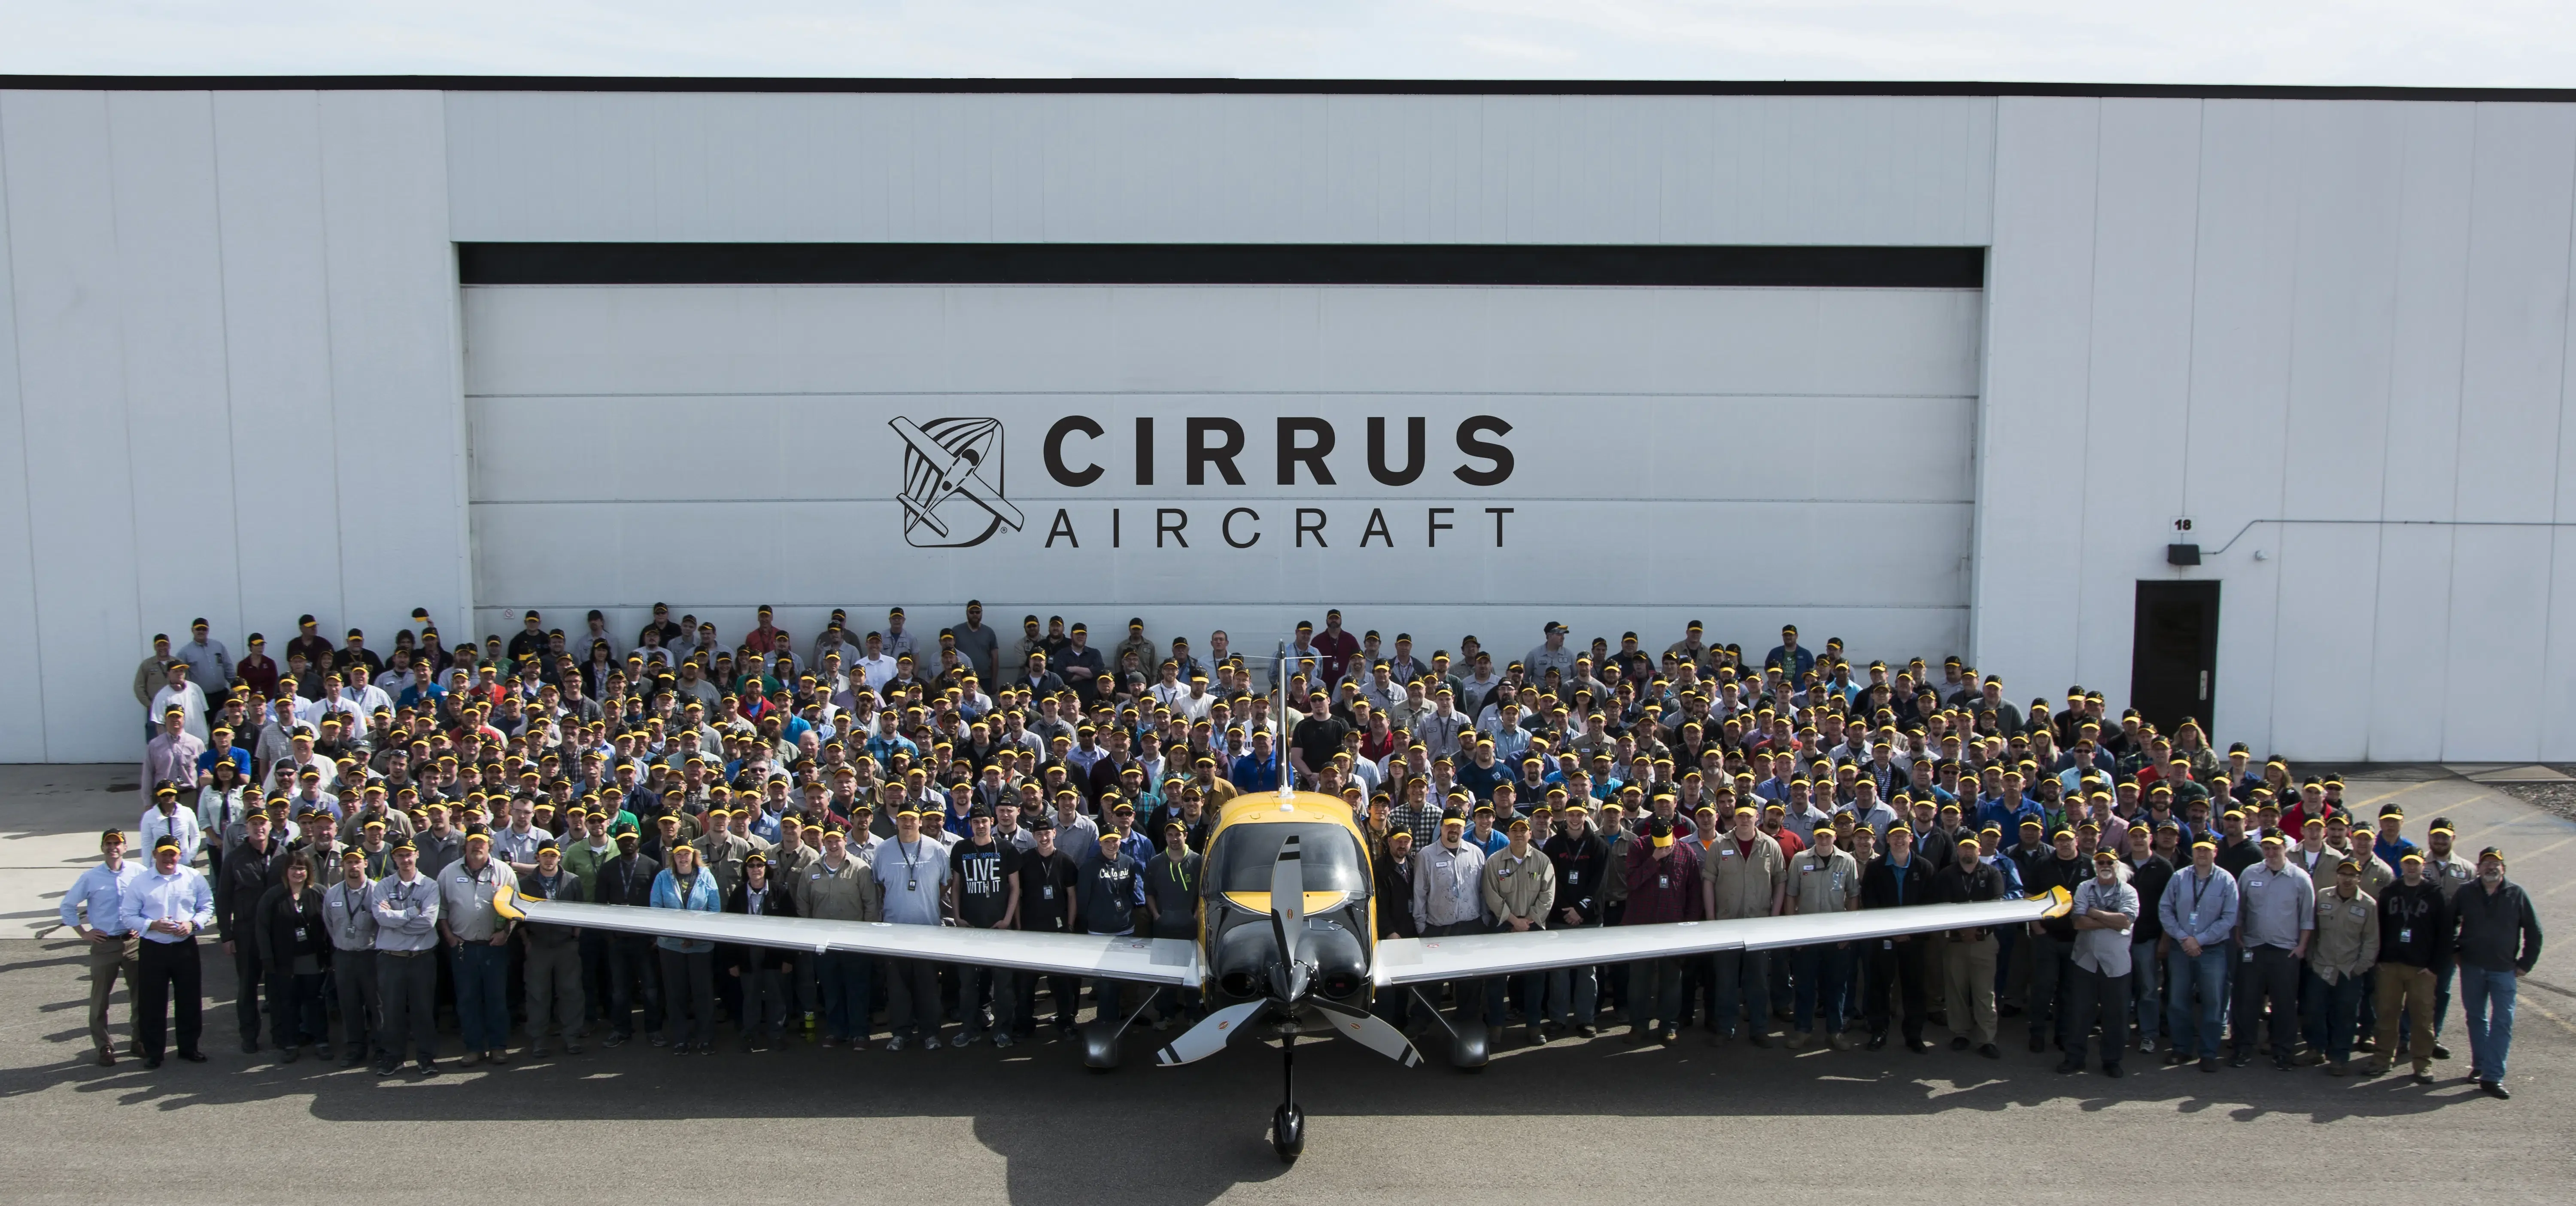 Cirrus Aircraft Celebrates 6,000th Airplane Delivery